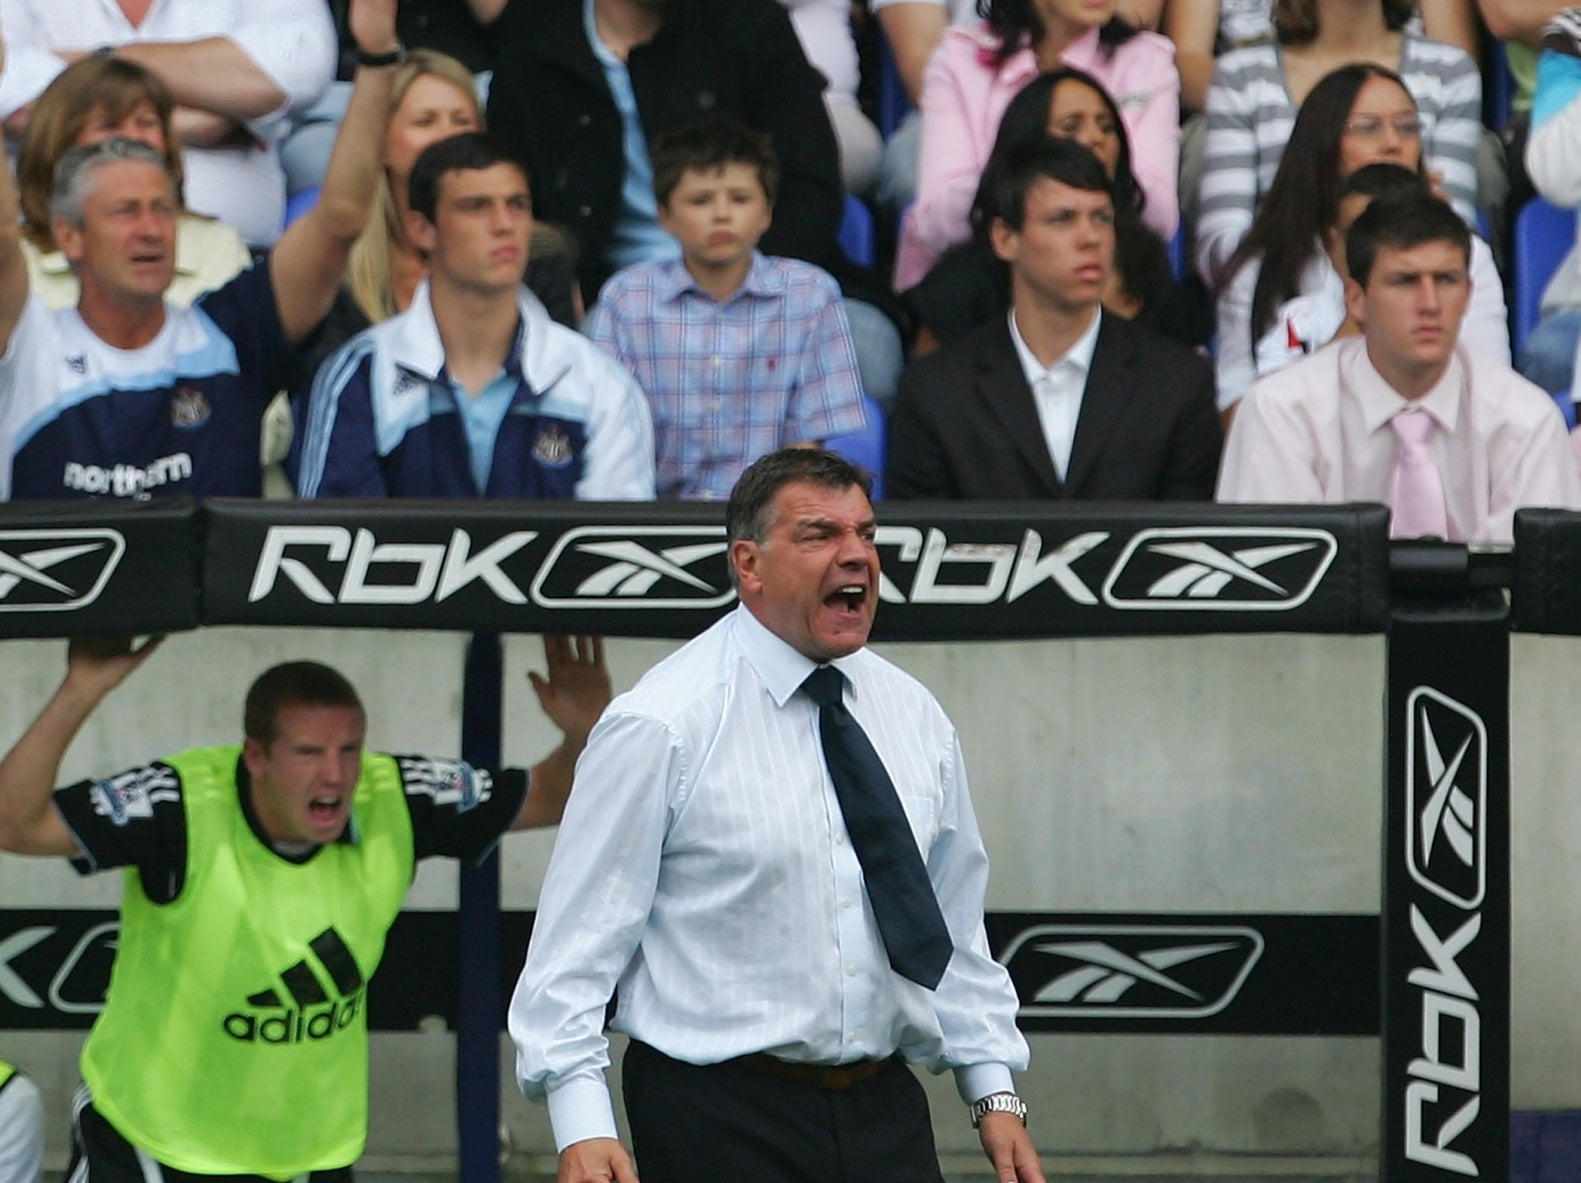 Sam Allardyce in charge of Newcastle in 2007 against his old side Bolton